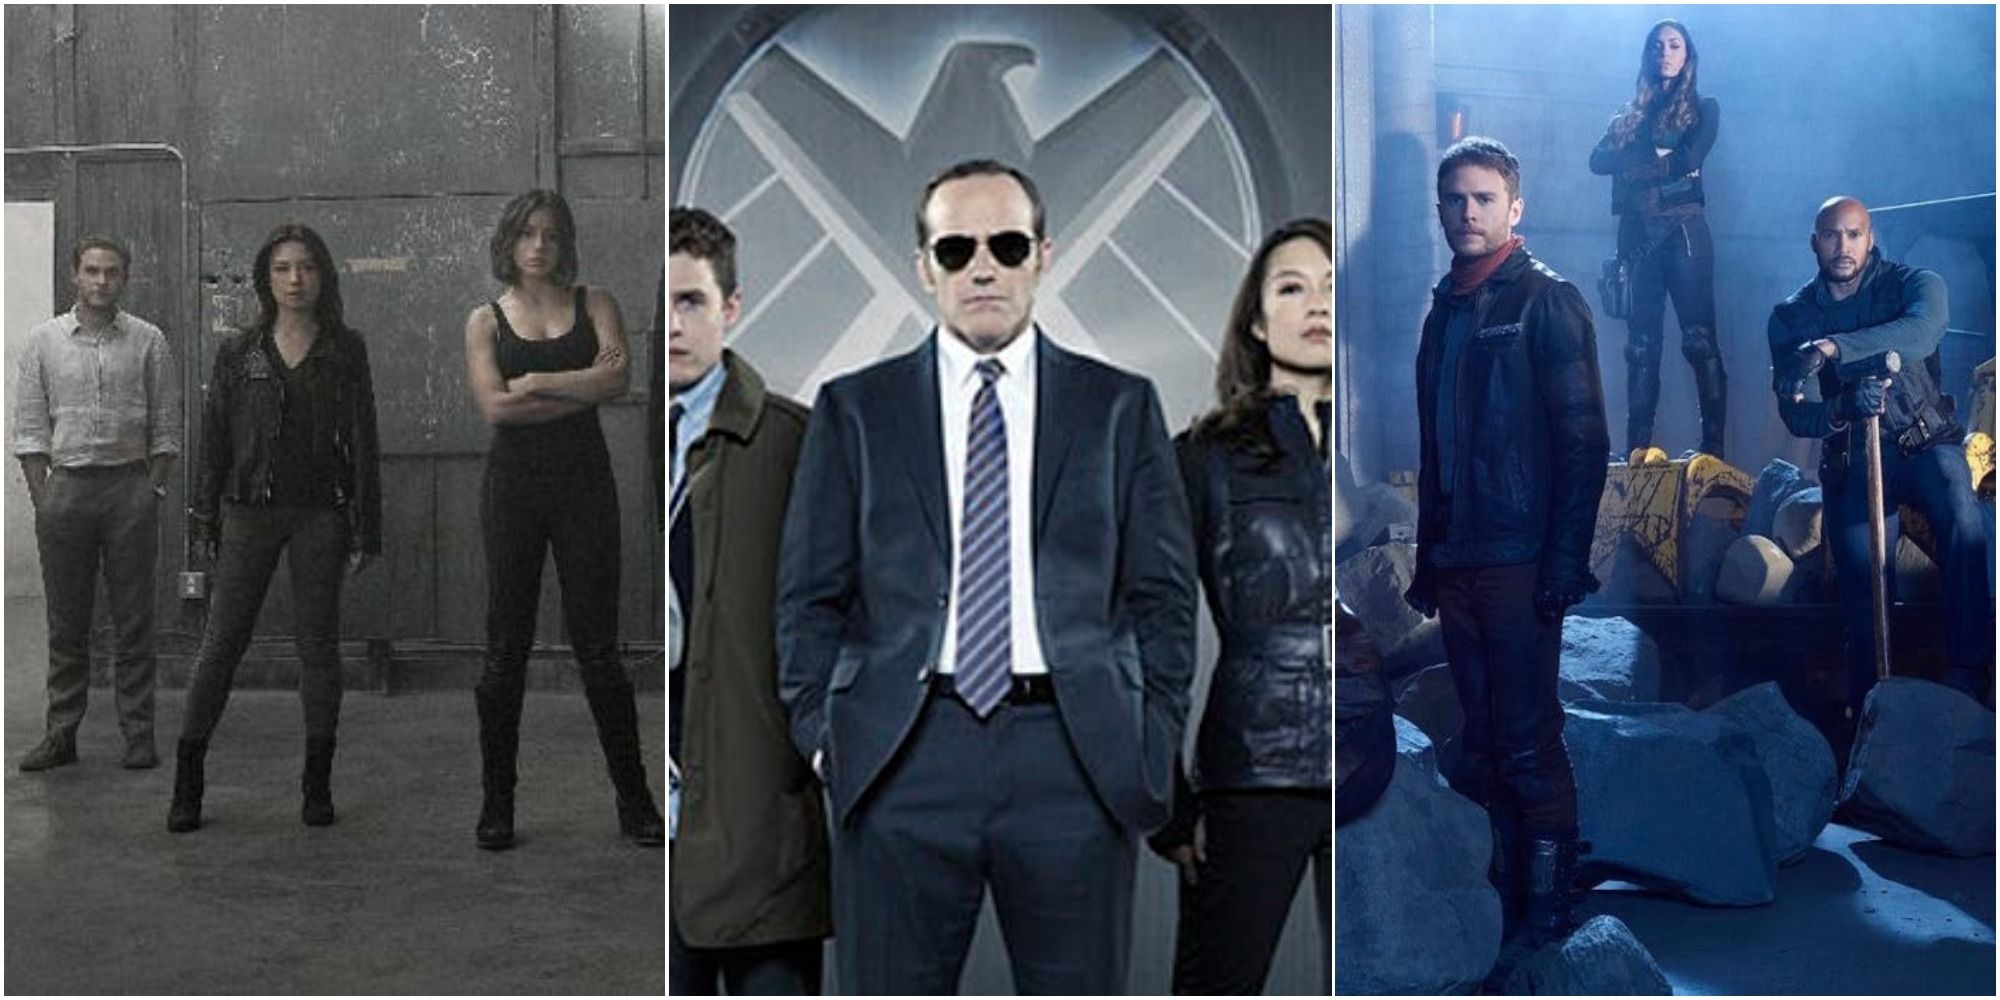 Agents of S.H.I.E.L.D. tri-split image with different members of the cast